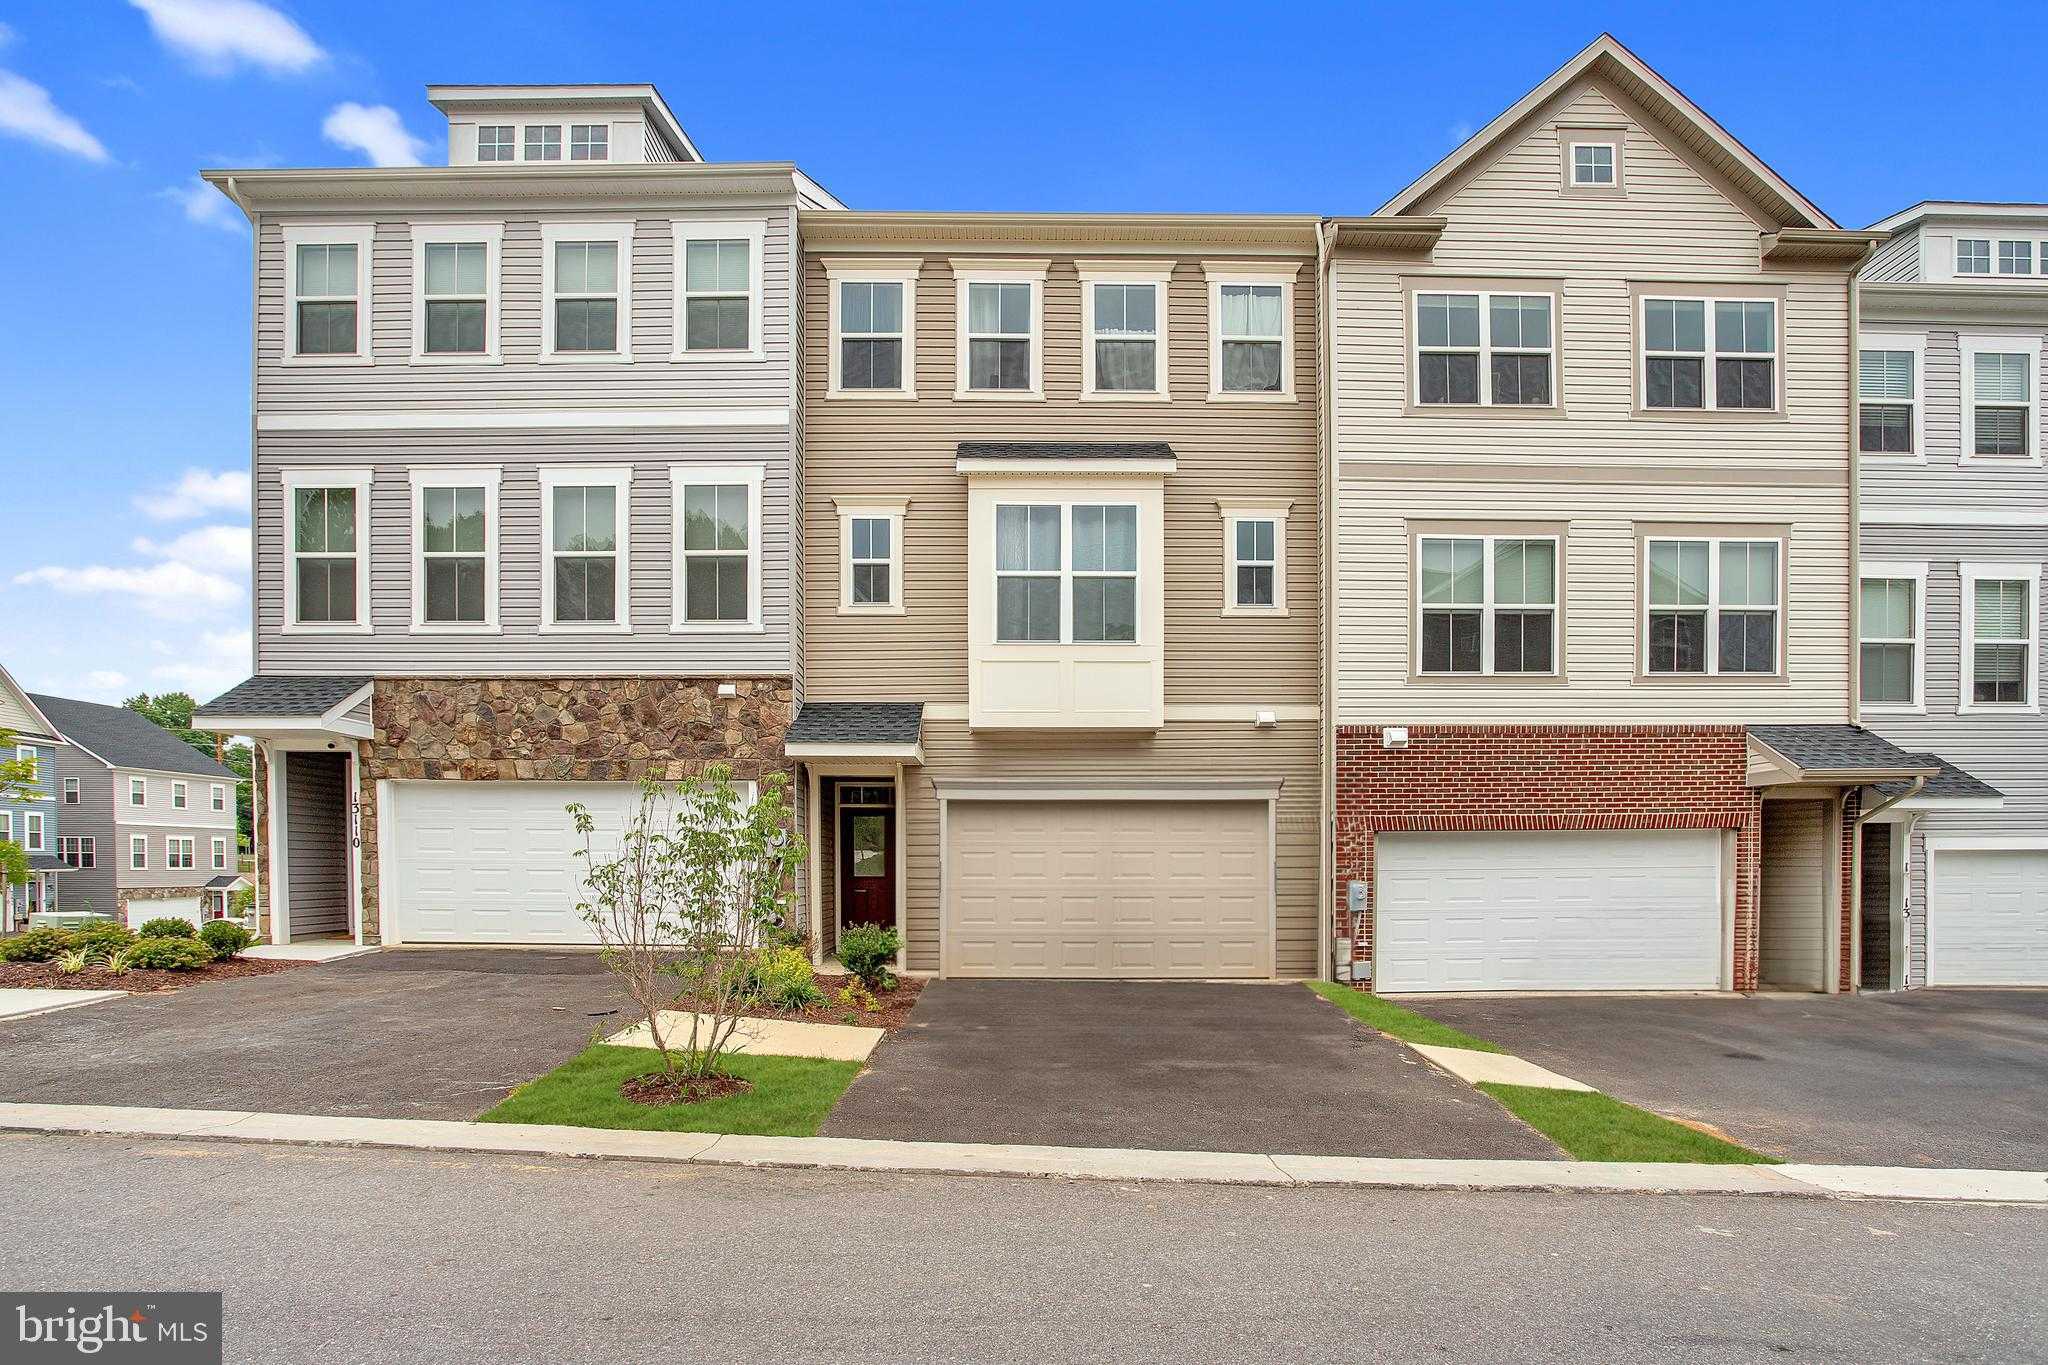 Photo 1 of 48 of 13112 DOWDENS STATION WAY townhome